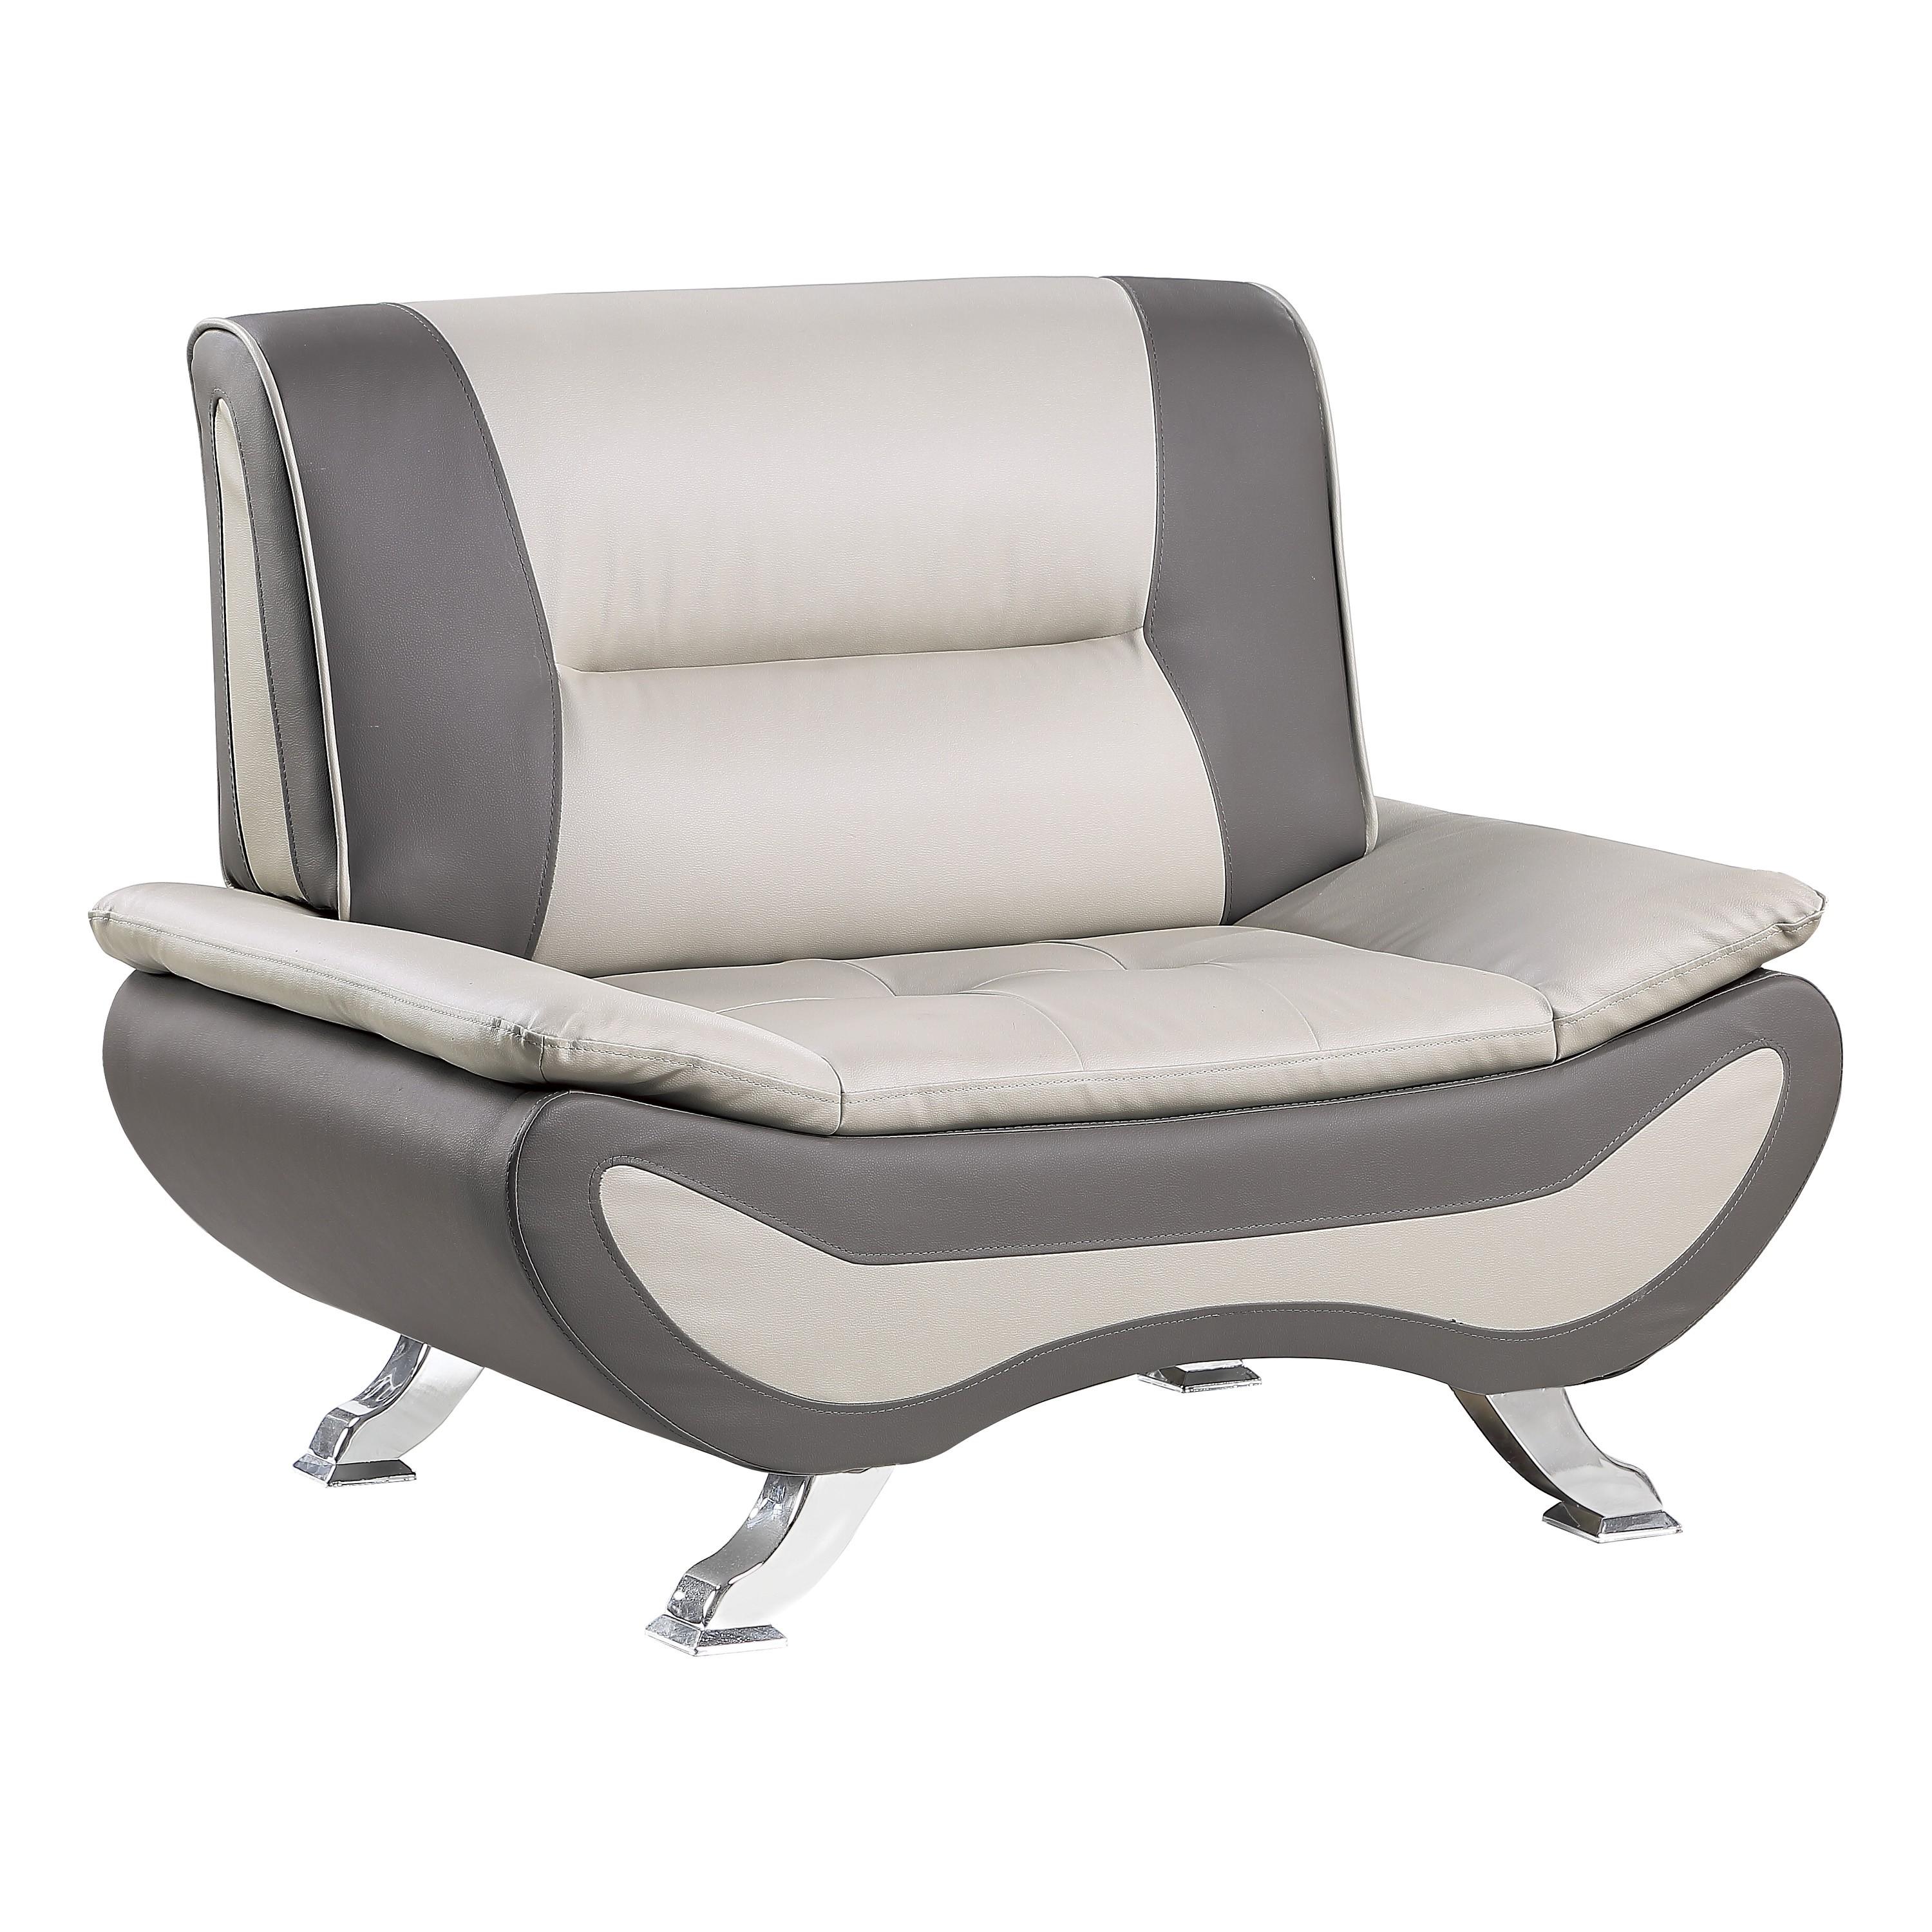 Contemporary Arm Chair 8219BEG-1 Veloce 8219BEG-1 in Gray, Beige Faux Leather